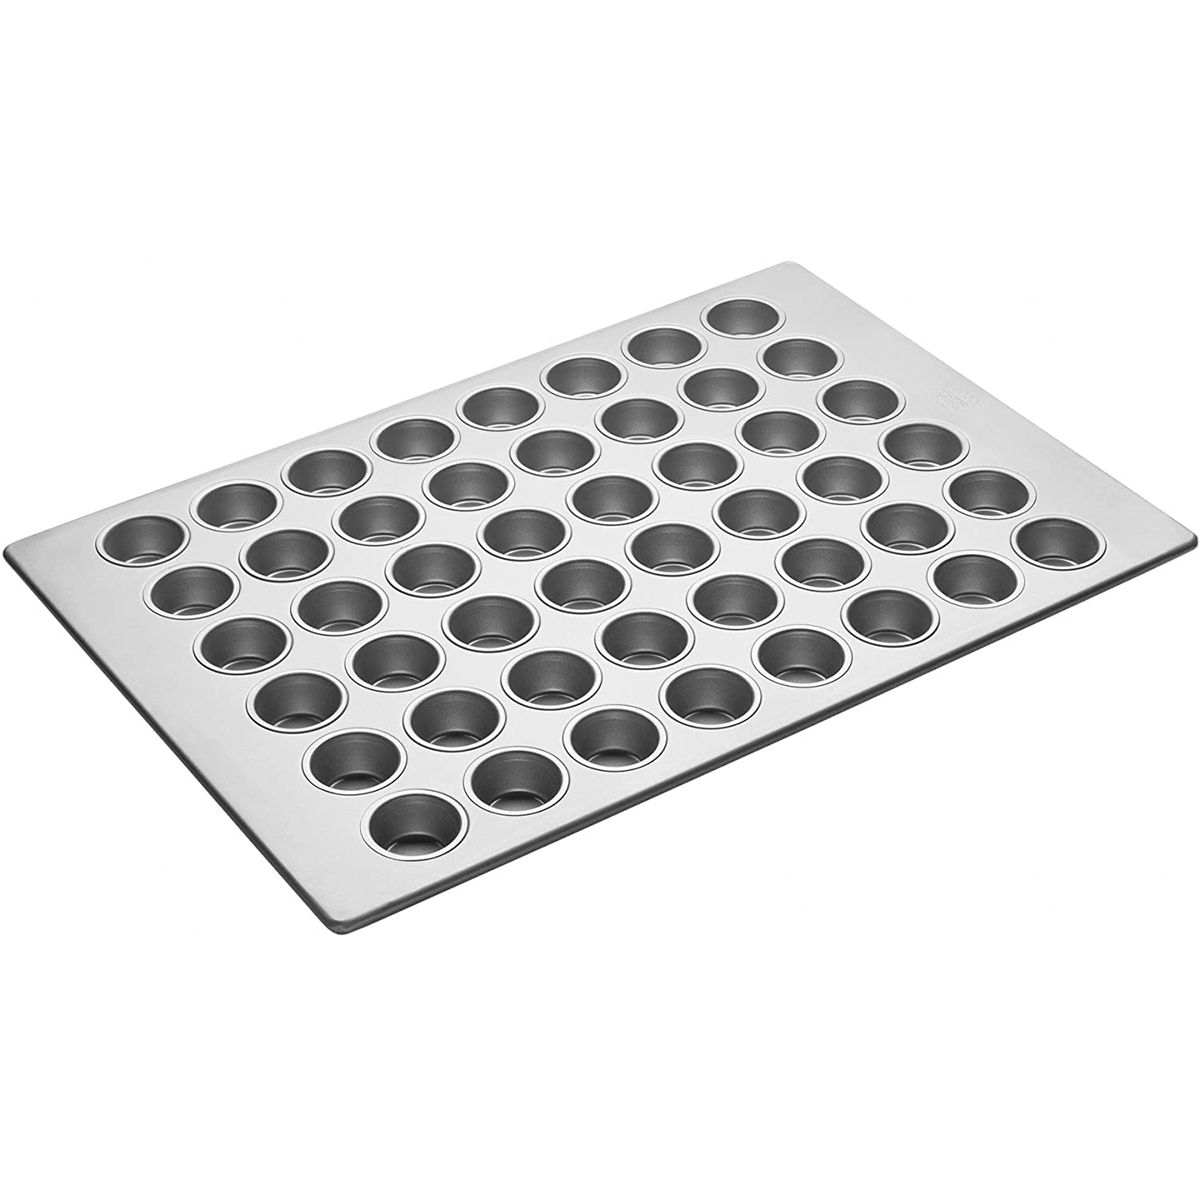 Aluminized Steel Mini Muffin Pan Glazed 48 Cups. Cup Size 2-1/16 x 1-1/8  Deep. Overall Size 18 x 26 Muffin Pans 